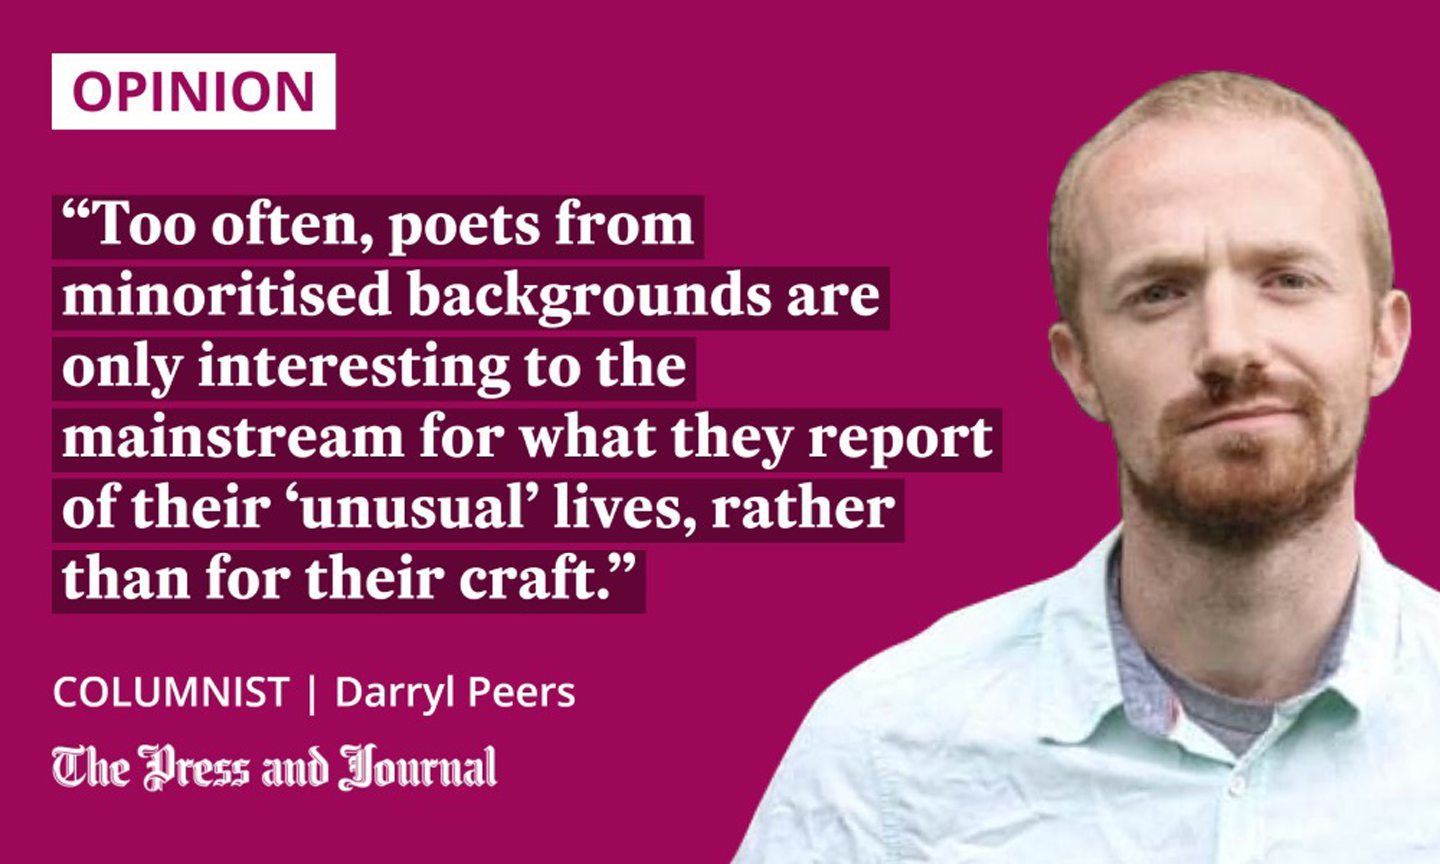 Columnist, Darryl Peers speaks about LGBTQ+ representation and media: "Too often, poets from minoritised backgrounds are considered less inventive than their normative counterparts, only interesting to the mainstream for what they report of their 'unusual' lives, rather than for their craft."